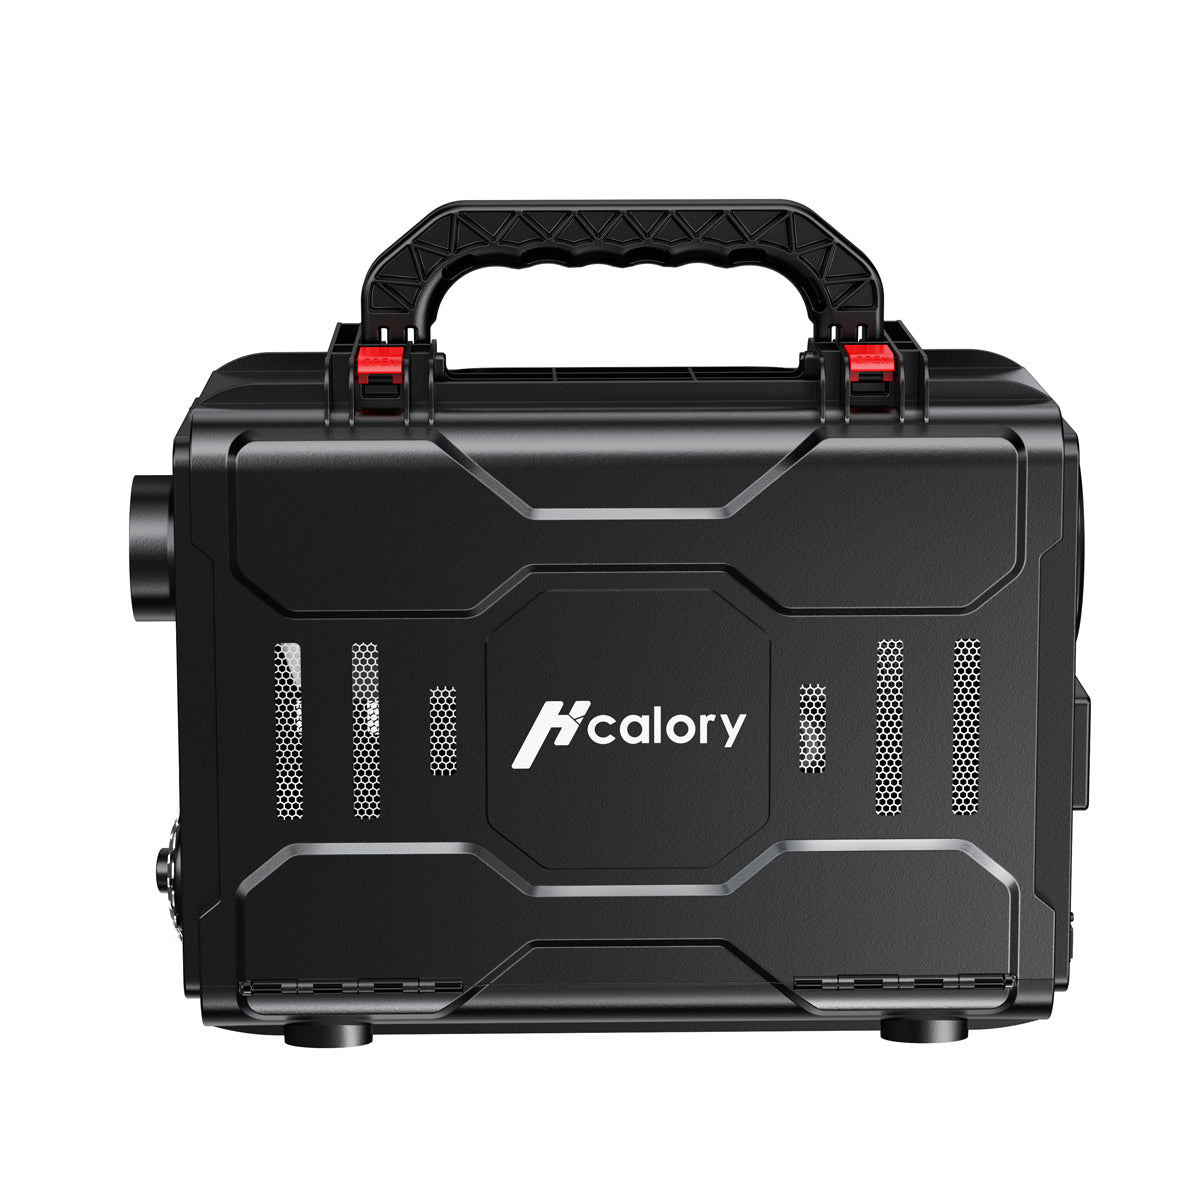 Hcalory-HC-A01-Diesel-Heater-5L-Handheld-Toolbox-All-In-One -back-Positive-Image 